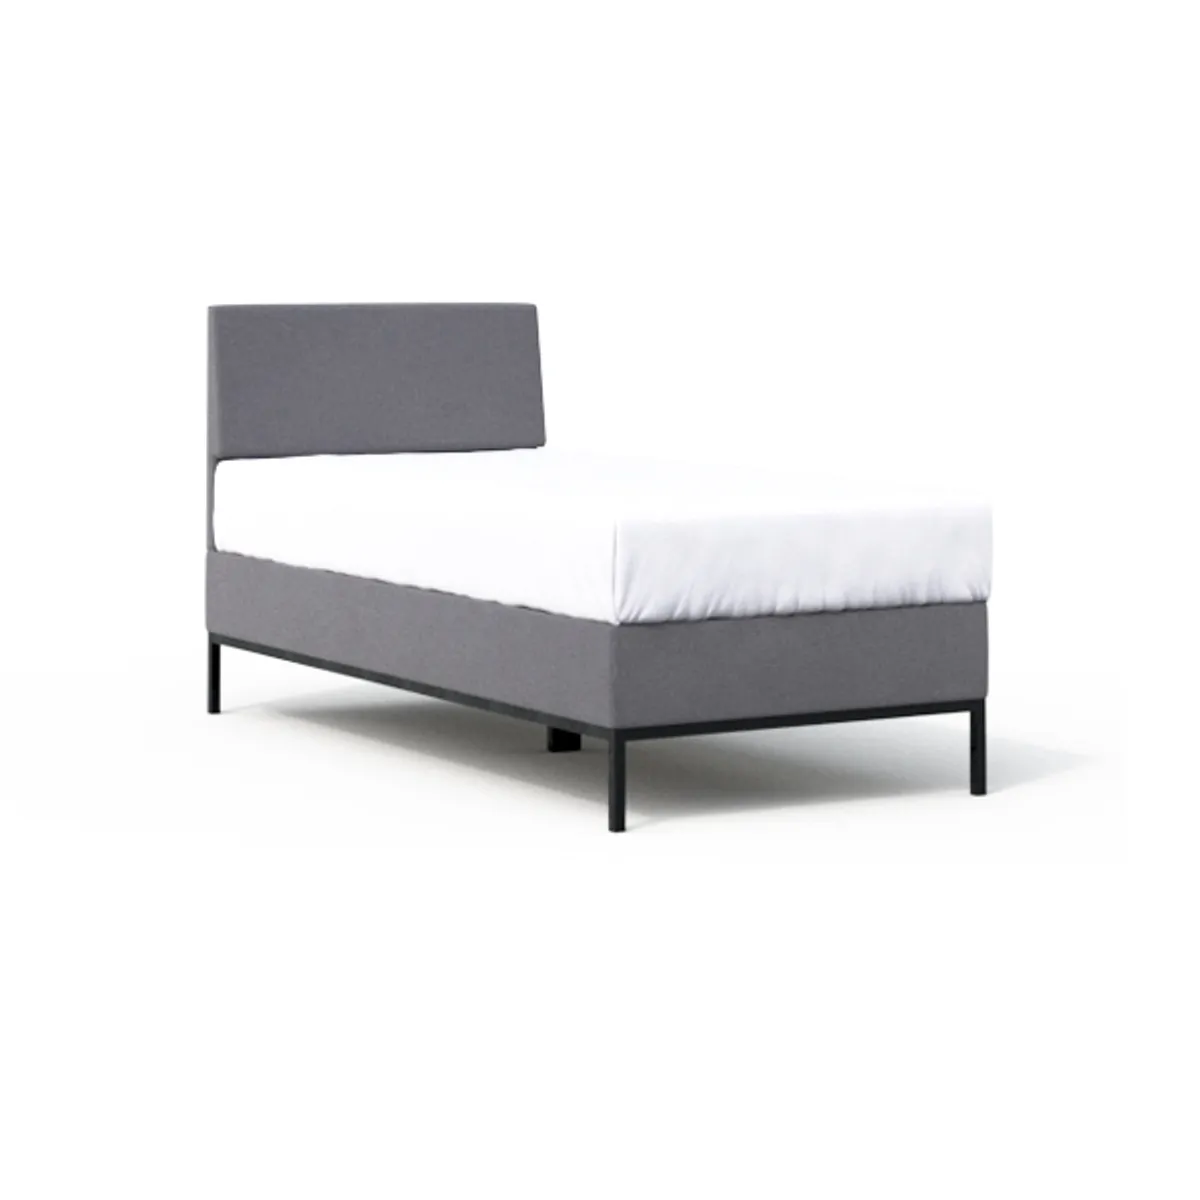 Grey Single bed Inside Out Contracts